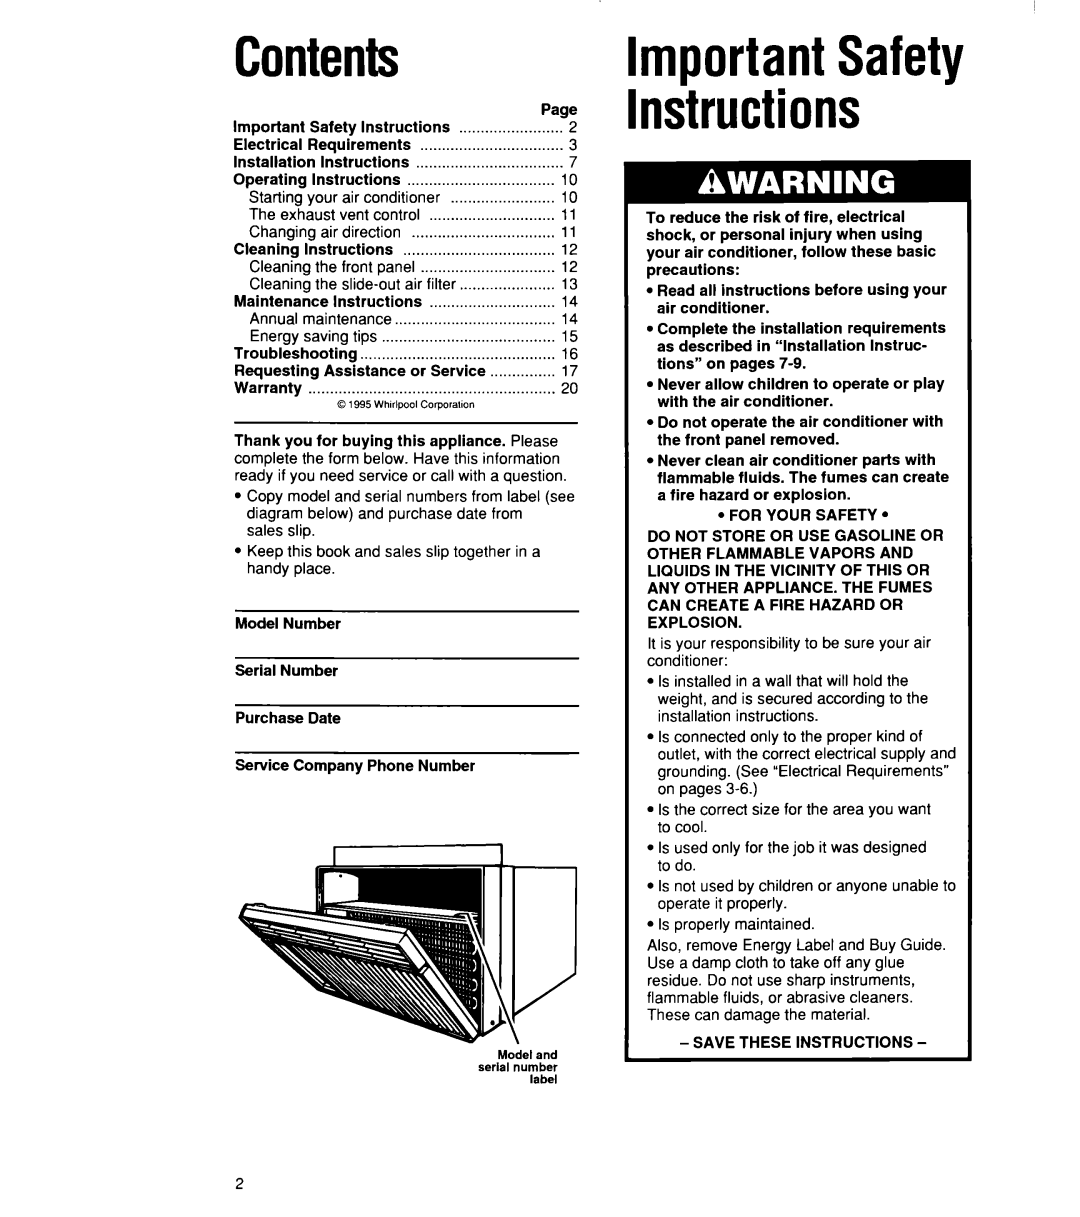 Whirlpool ACU072XE installation instructions Contents, mportantSafety nstructions 